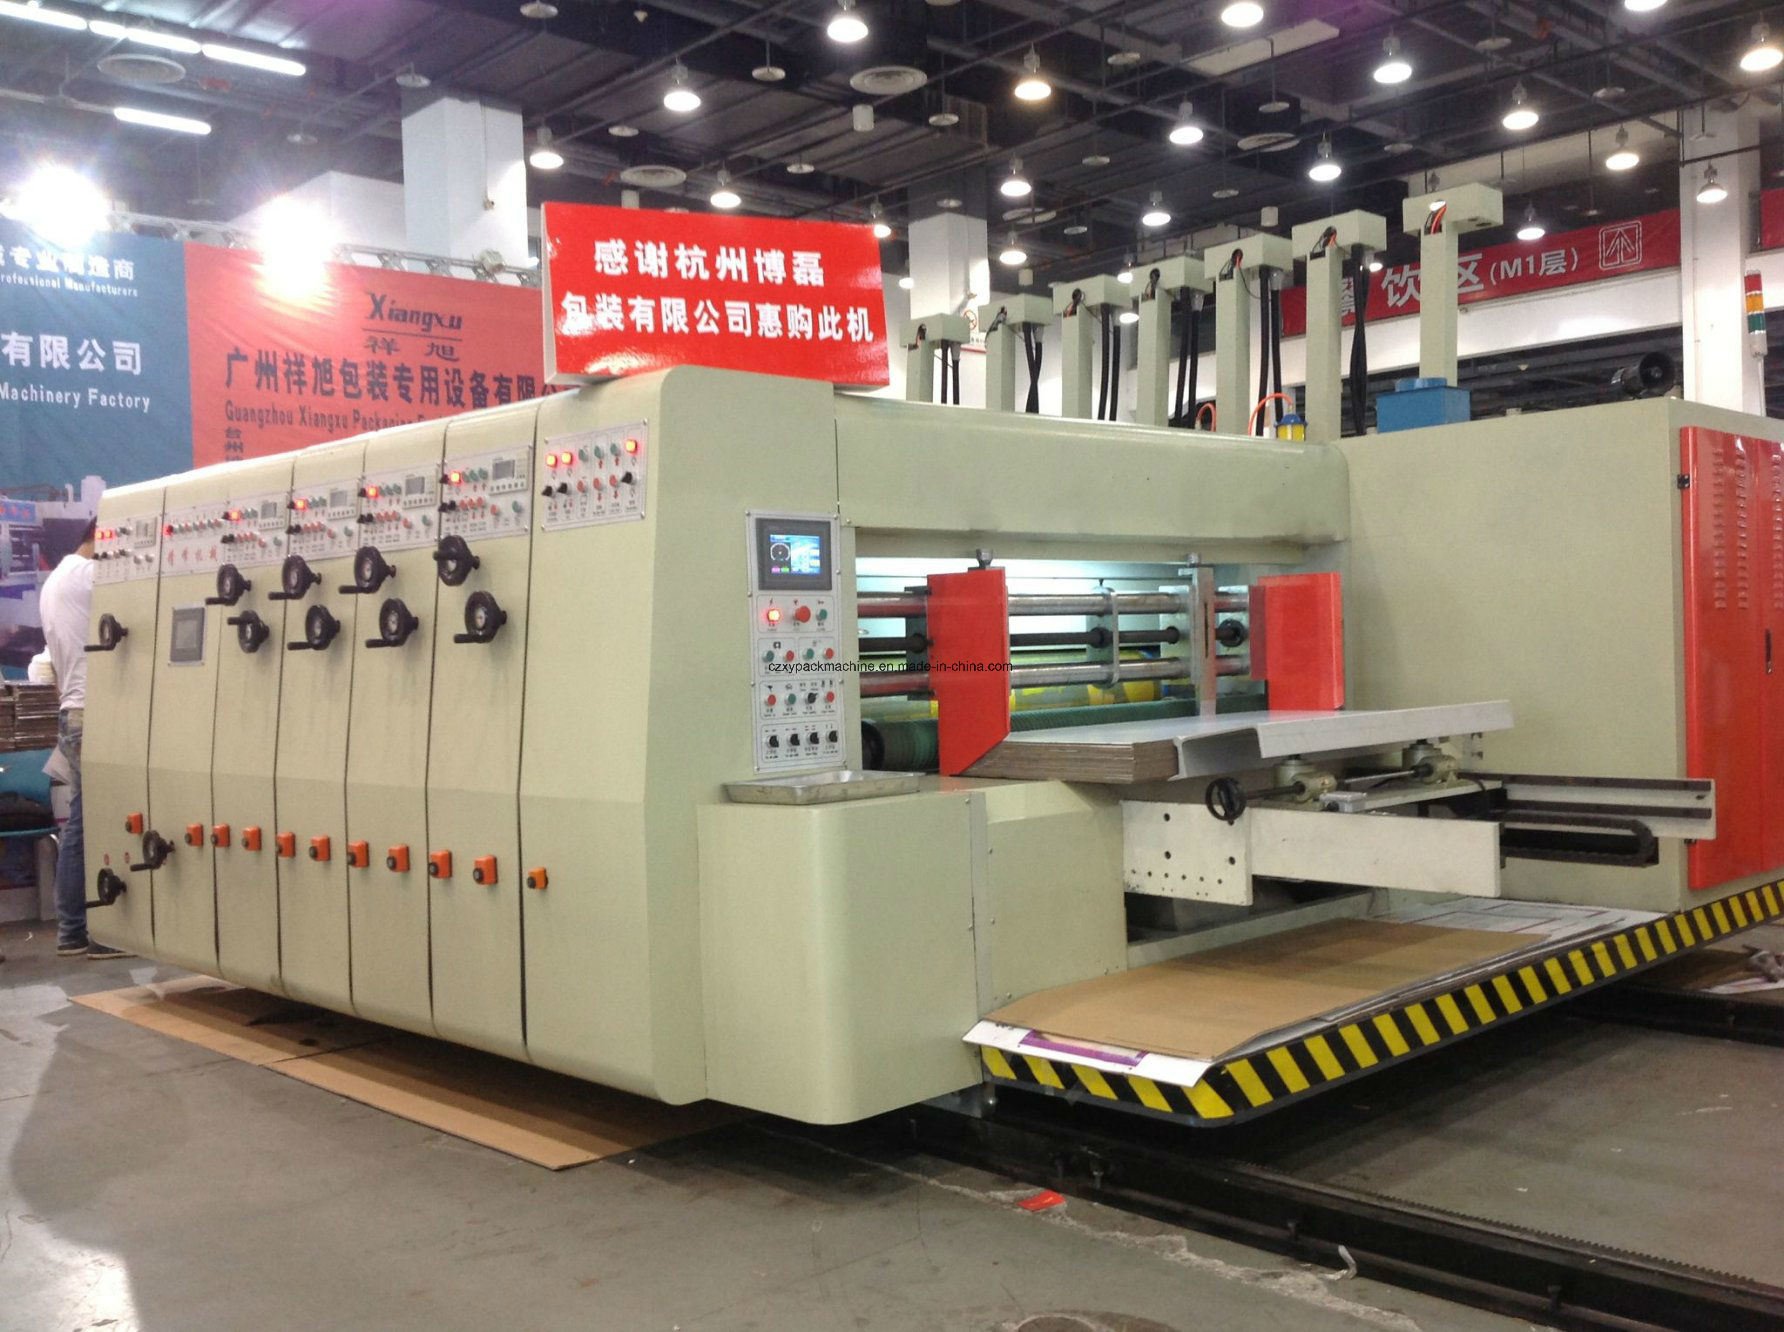 4 Color Narrow Web Flexo Die Cutting and Printing Machine